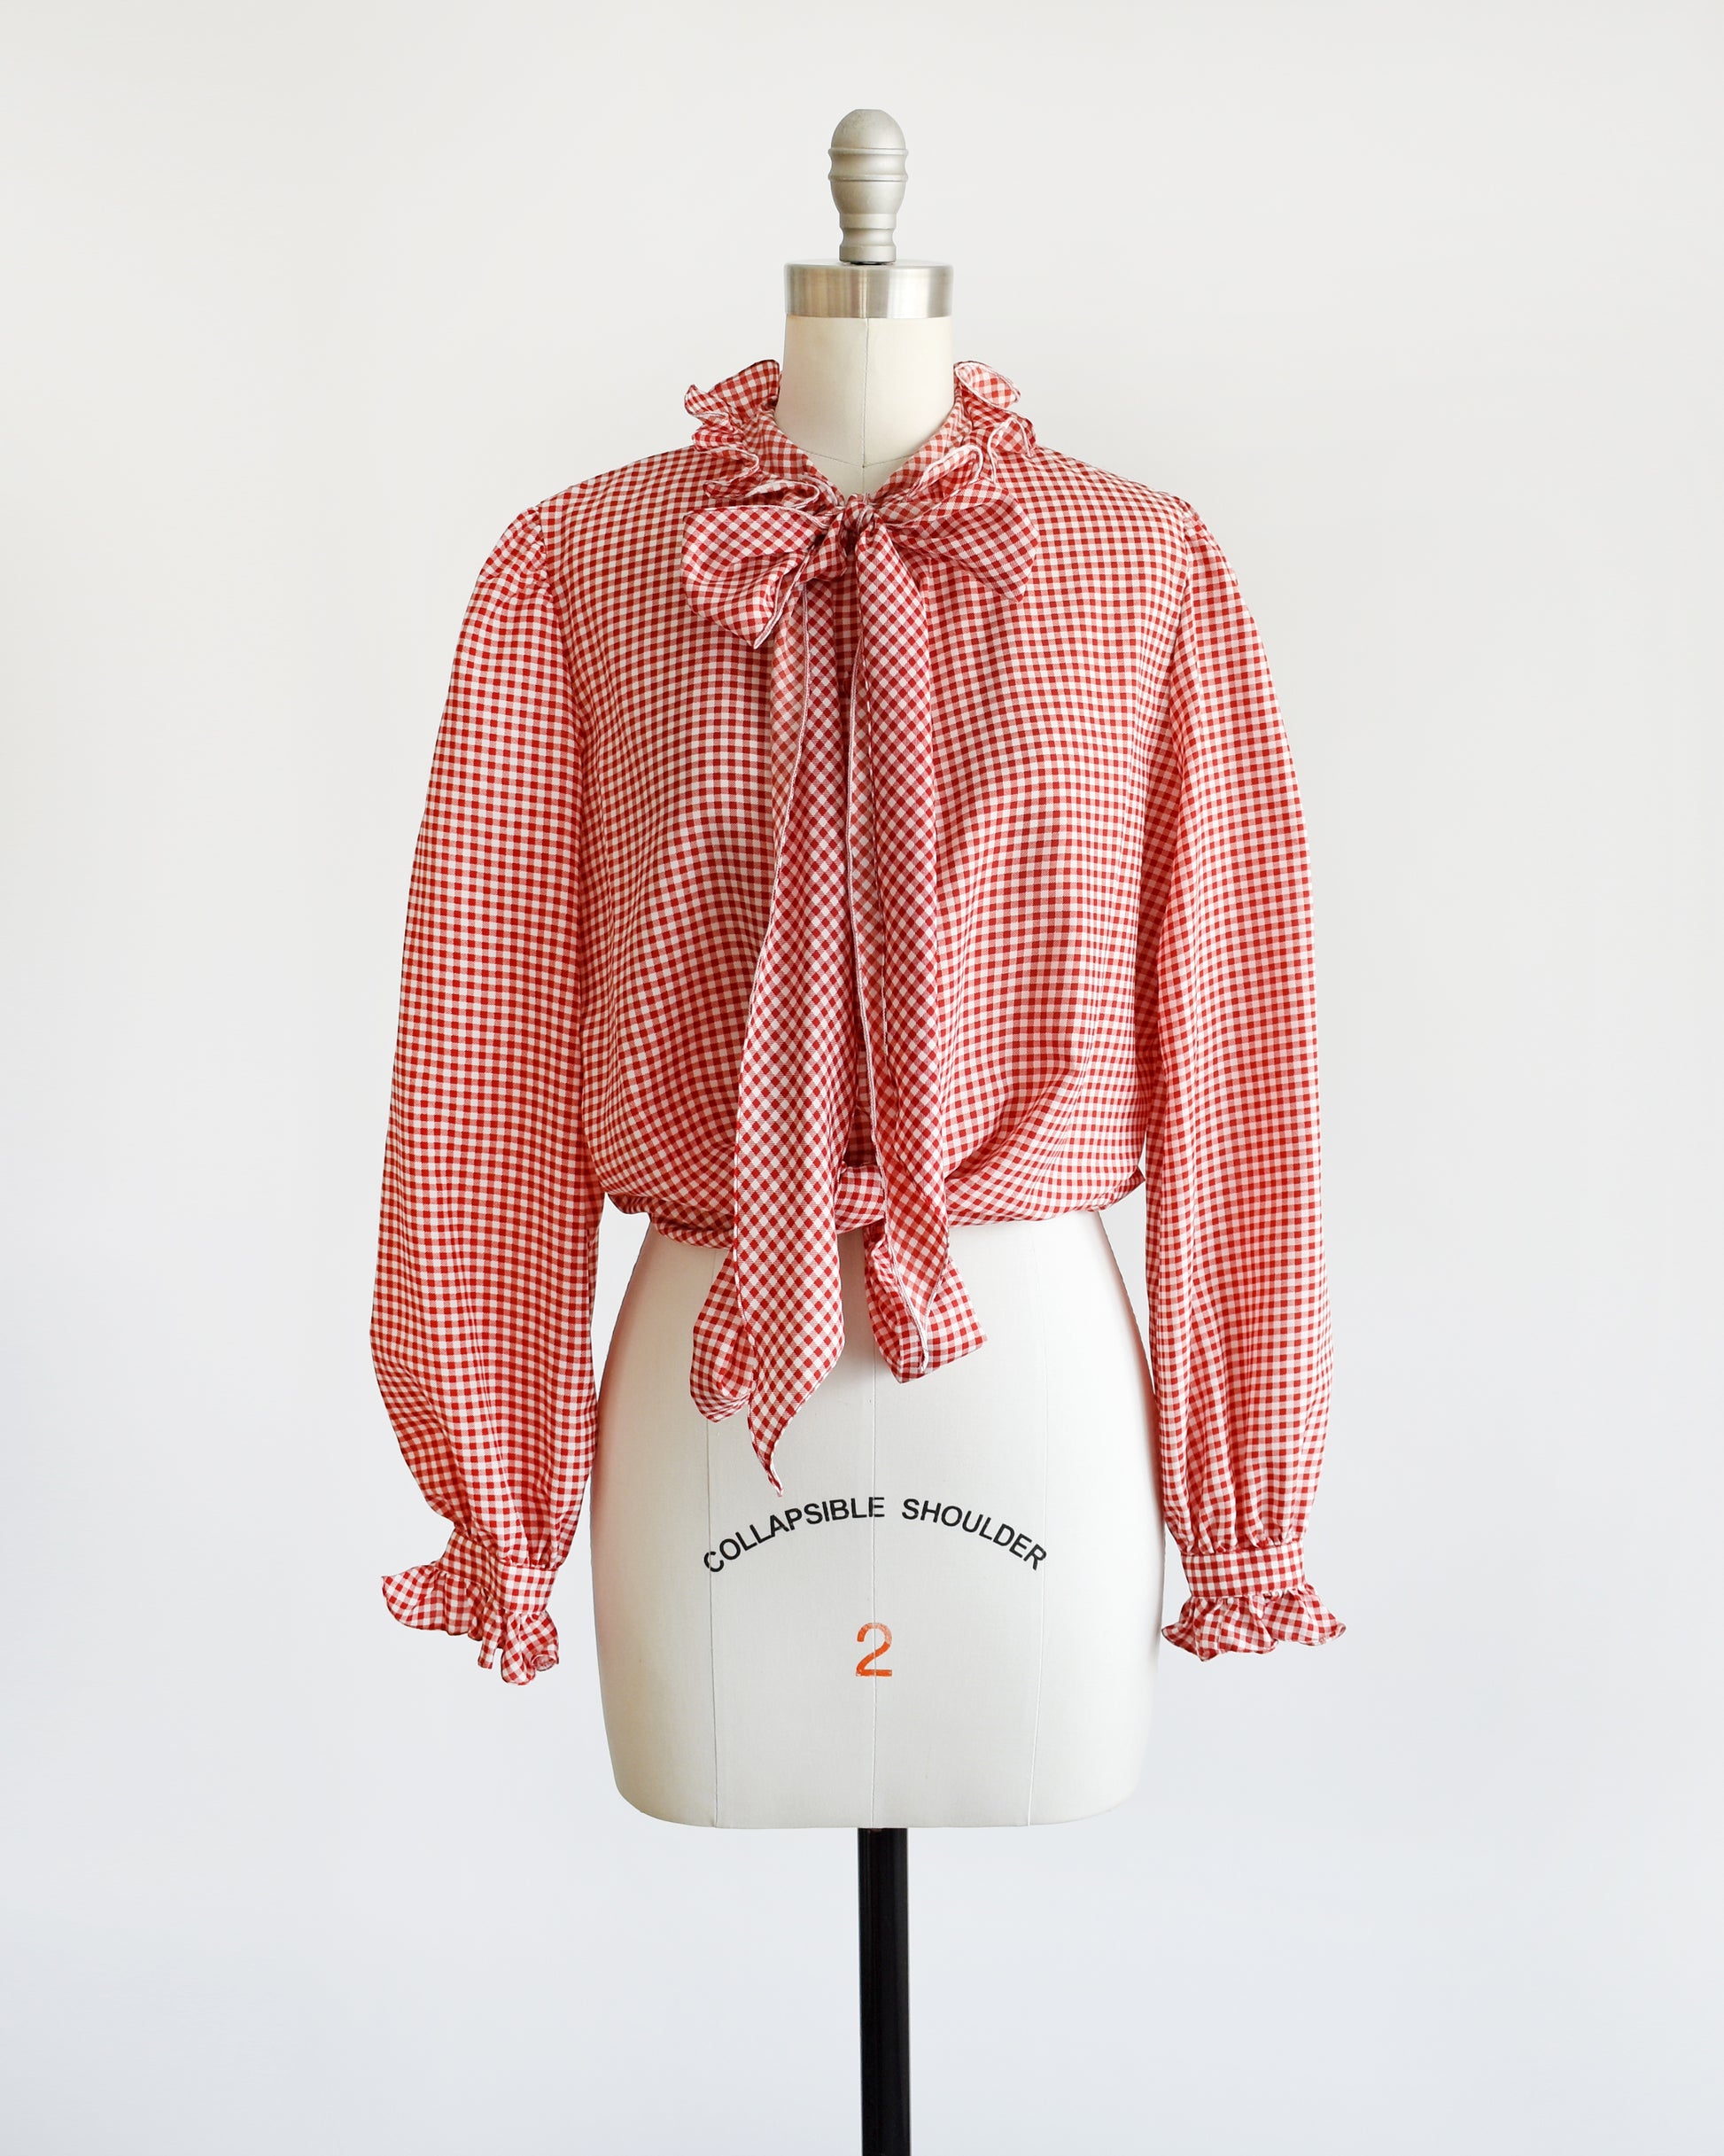 A vintage 1980s red and white gingham blouse with ruffled collar and ascot bow. The blouse is tied at the bottom giving it a cropped look